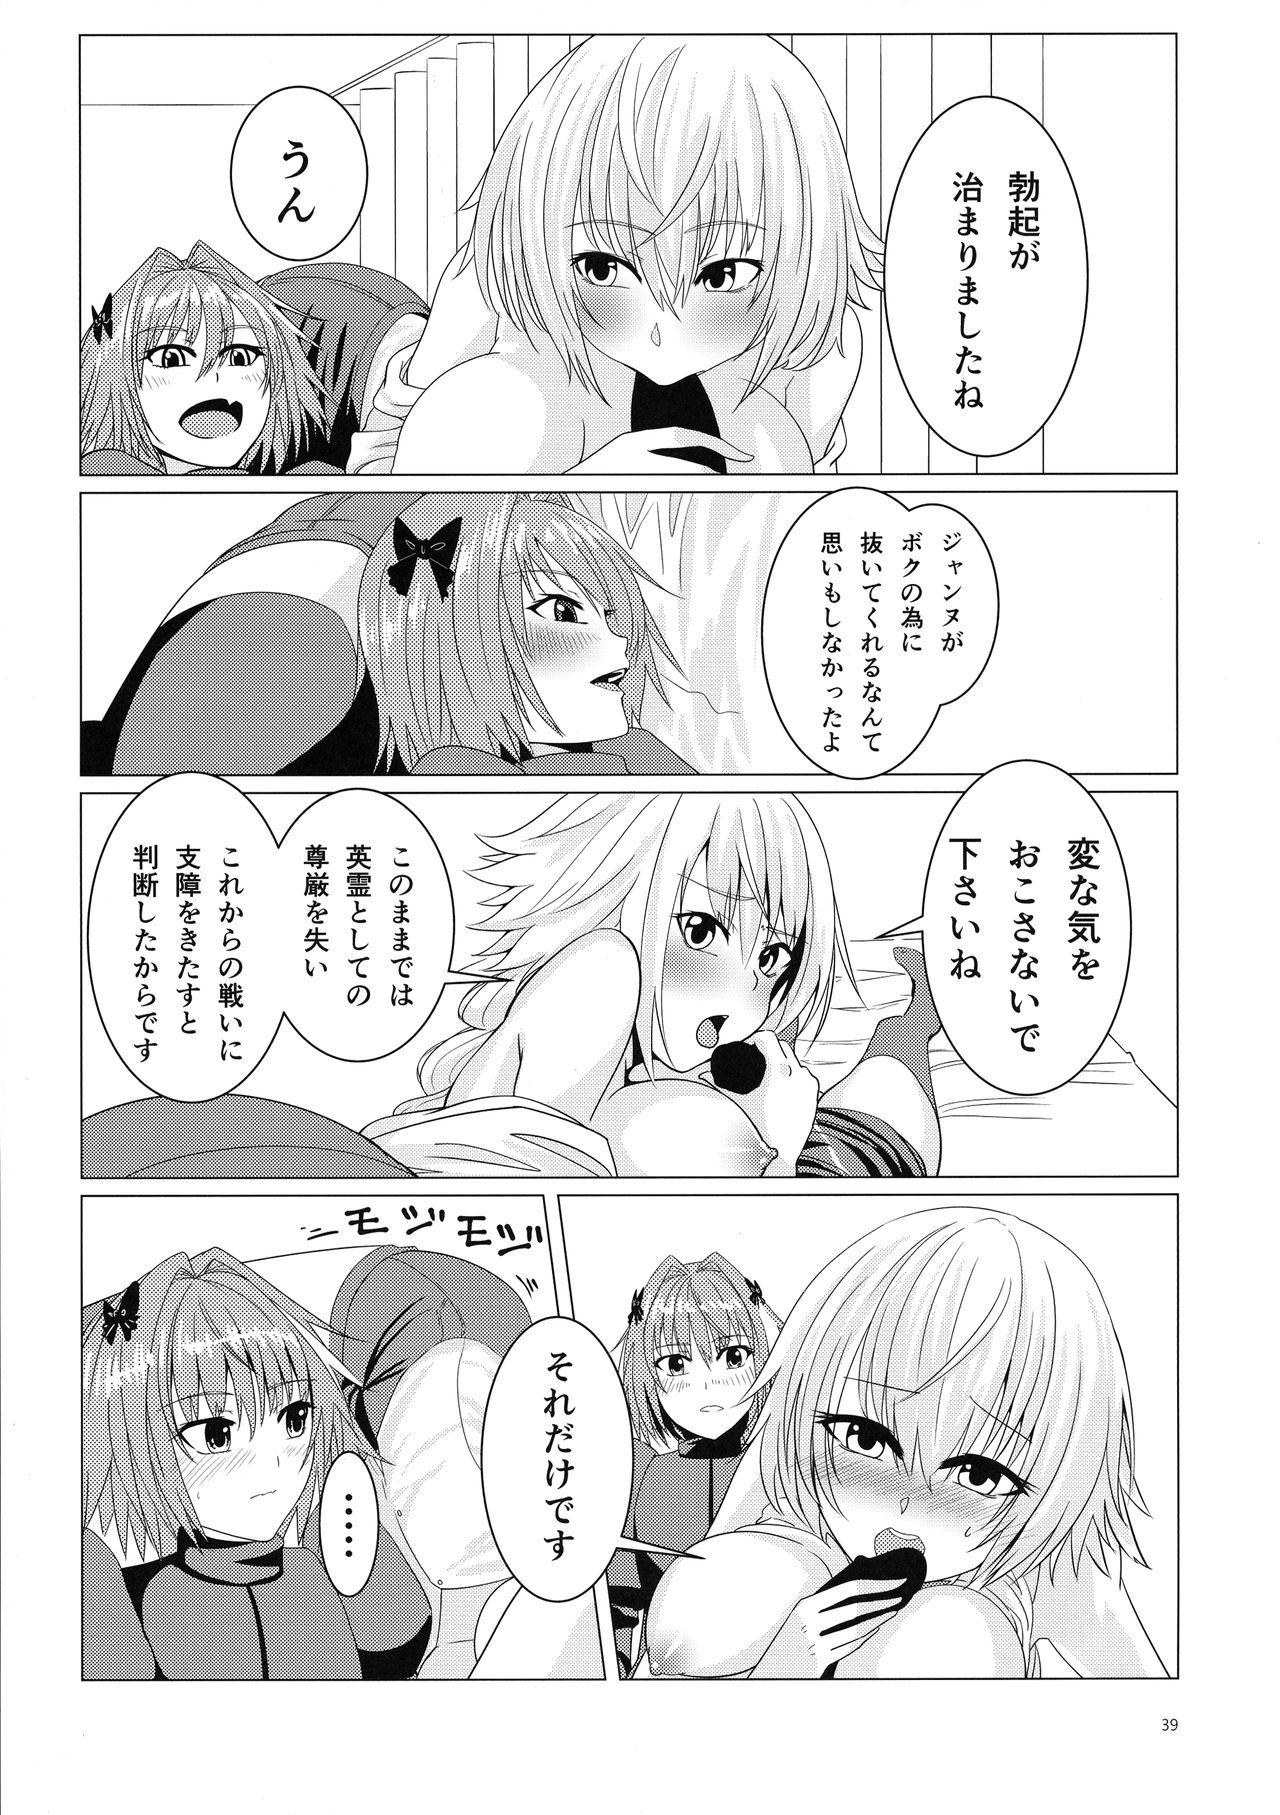 Matching Spirits - Jeanne and Astolfo have sex 35